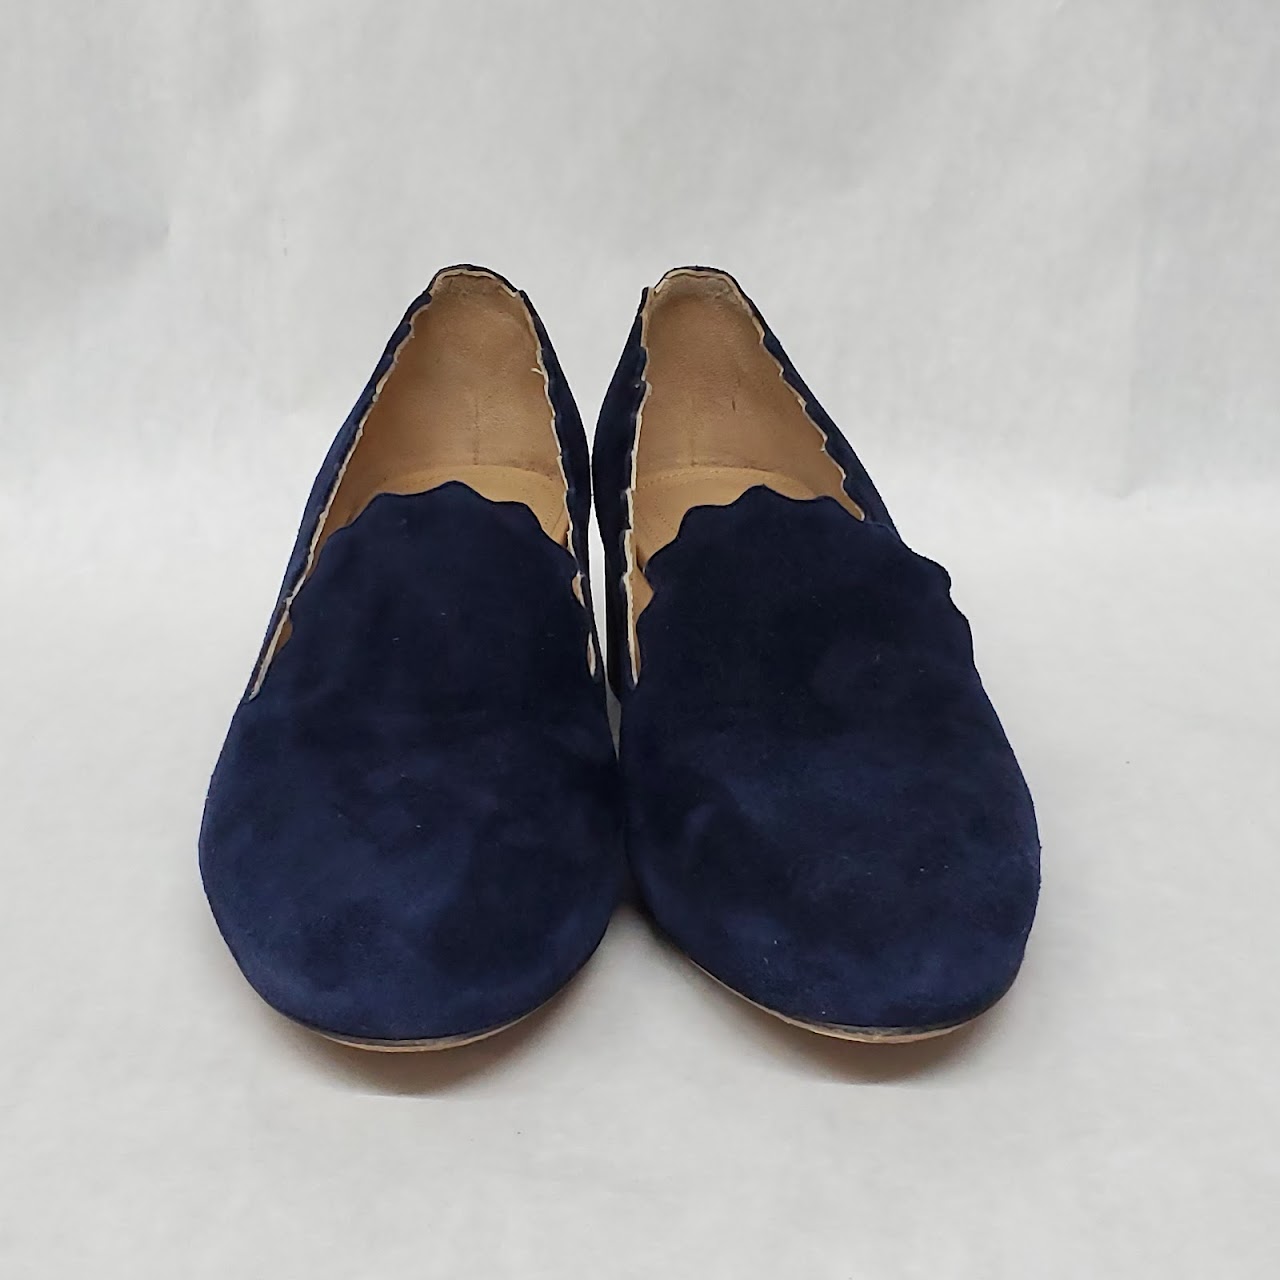 Chloé Scalloped Heeled Loafers